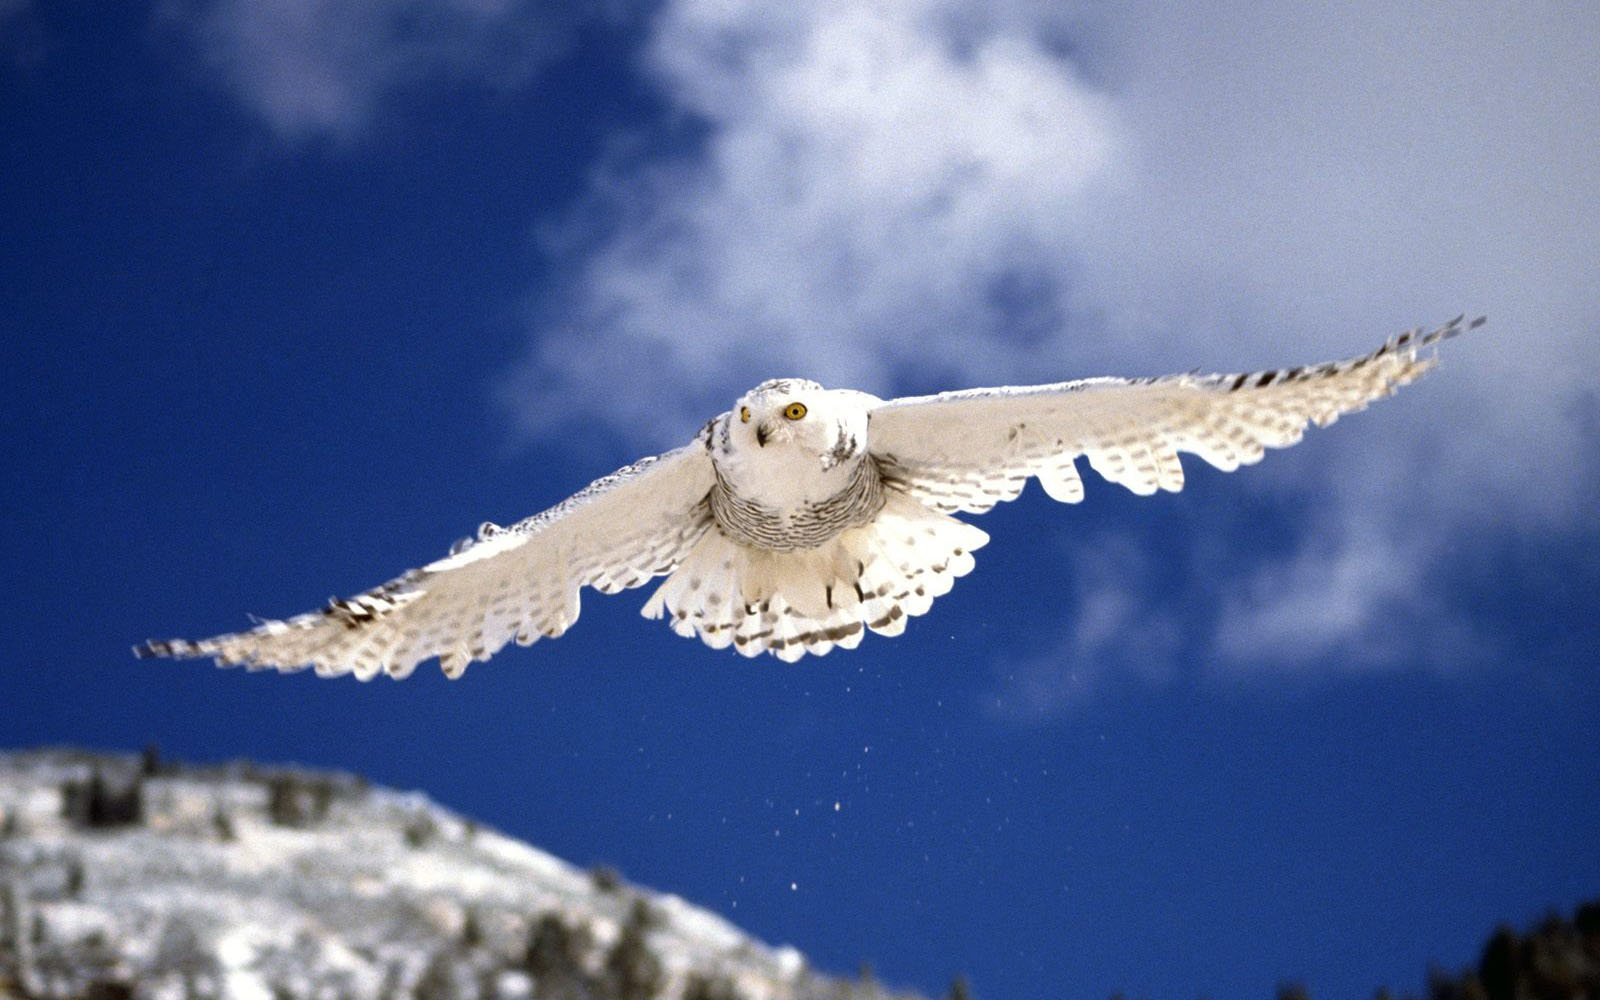 Tag White Owl Wallpaper Background Photos Image Andpictures For